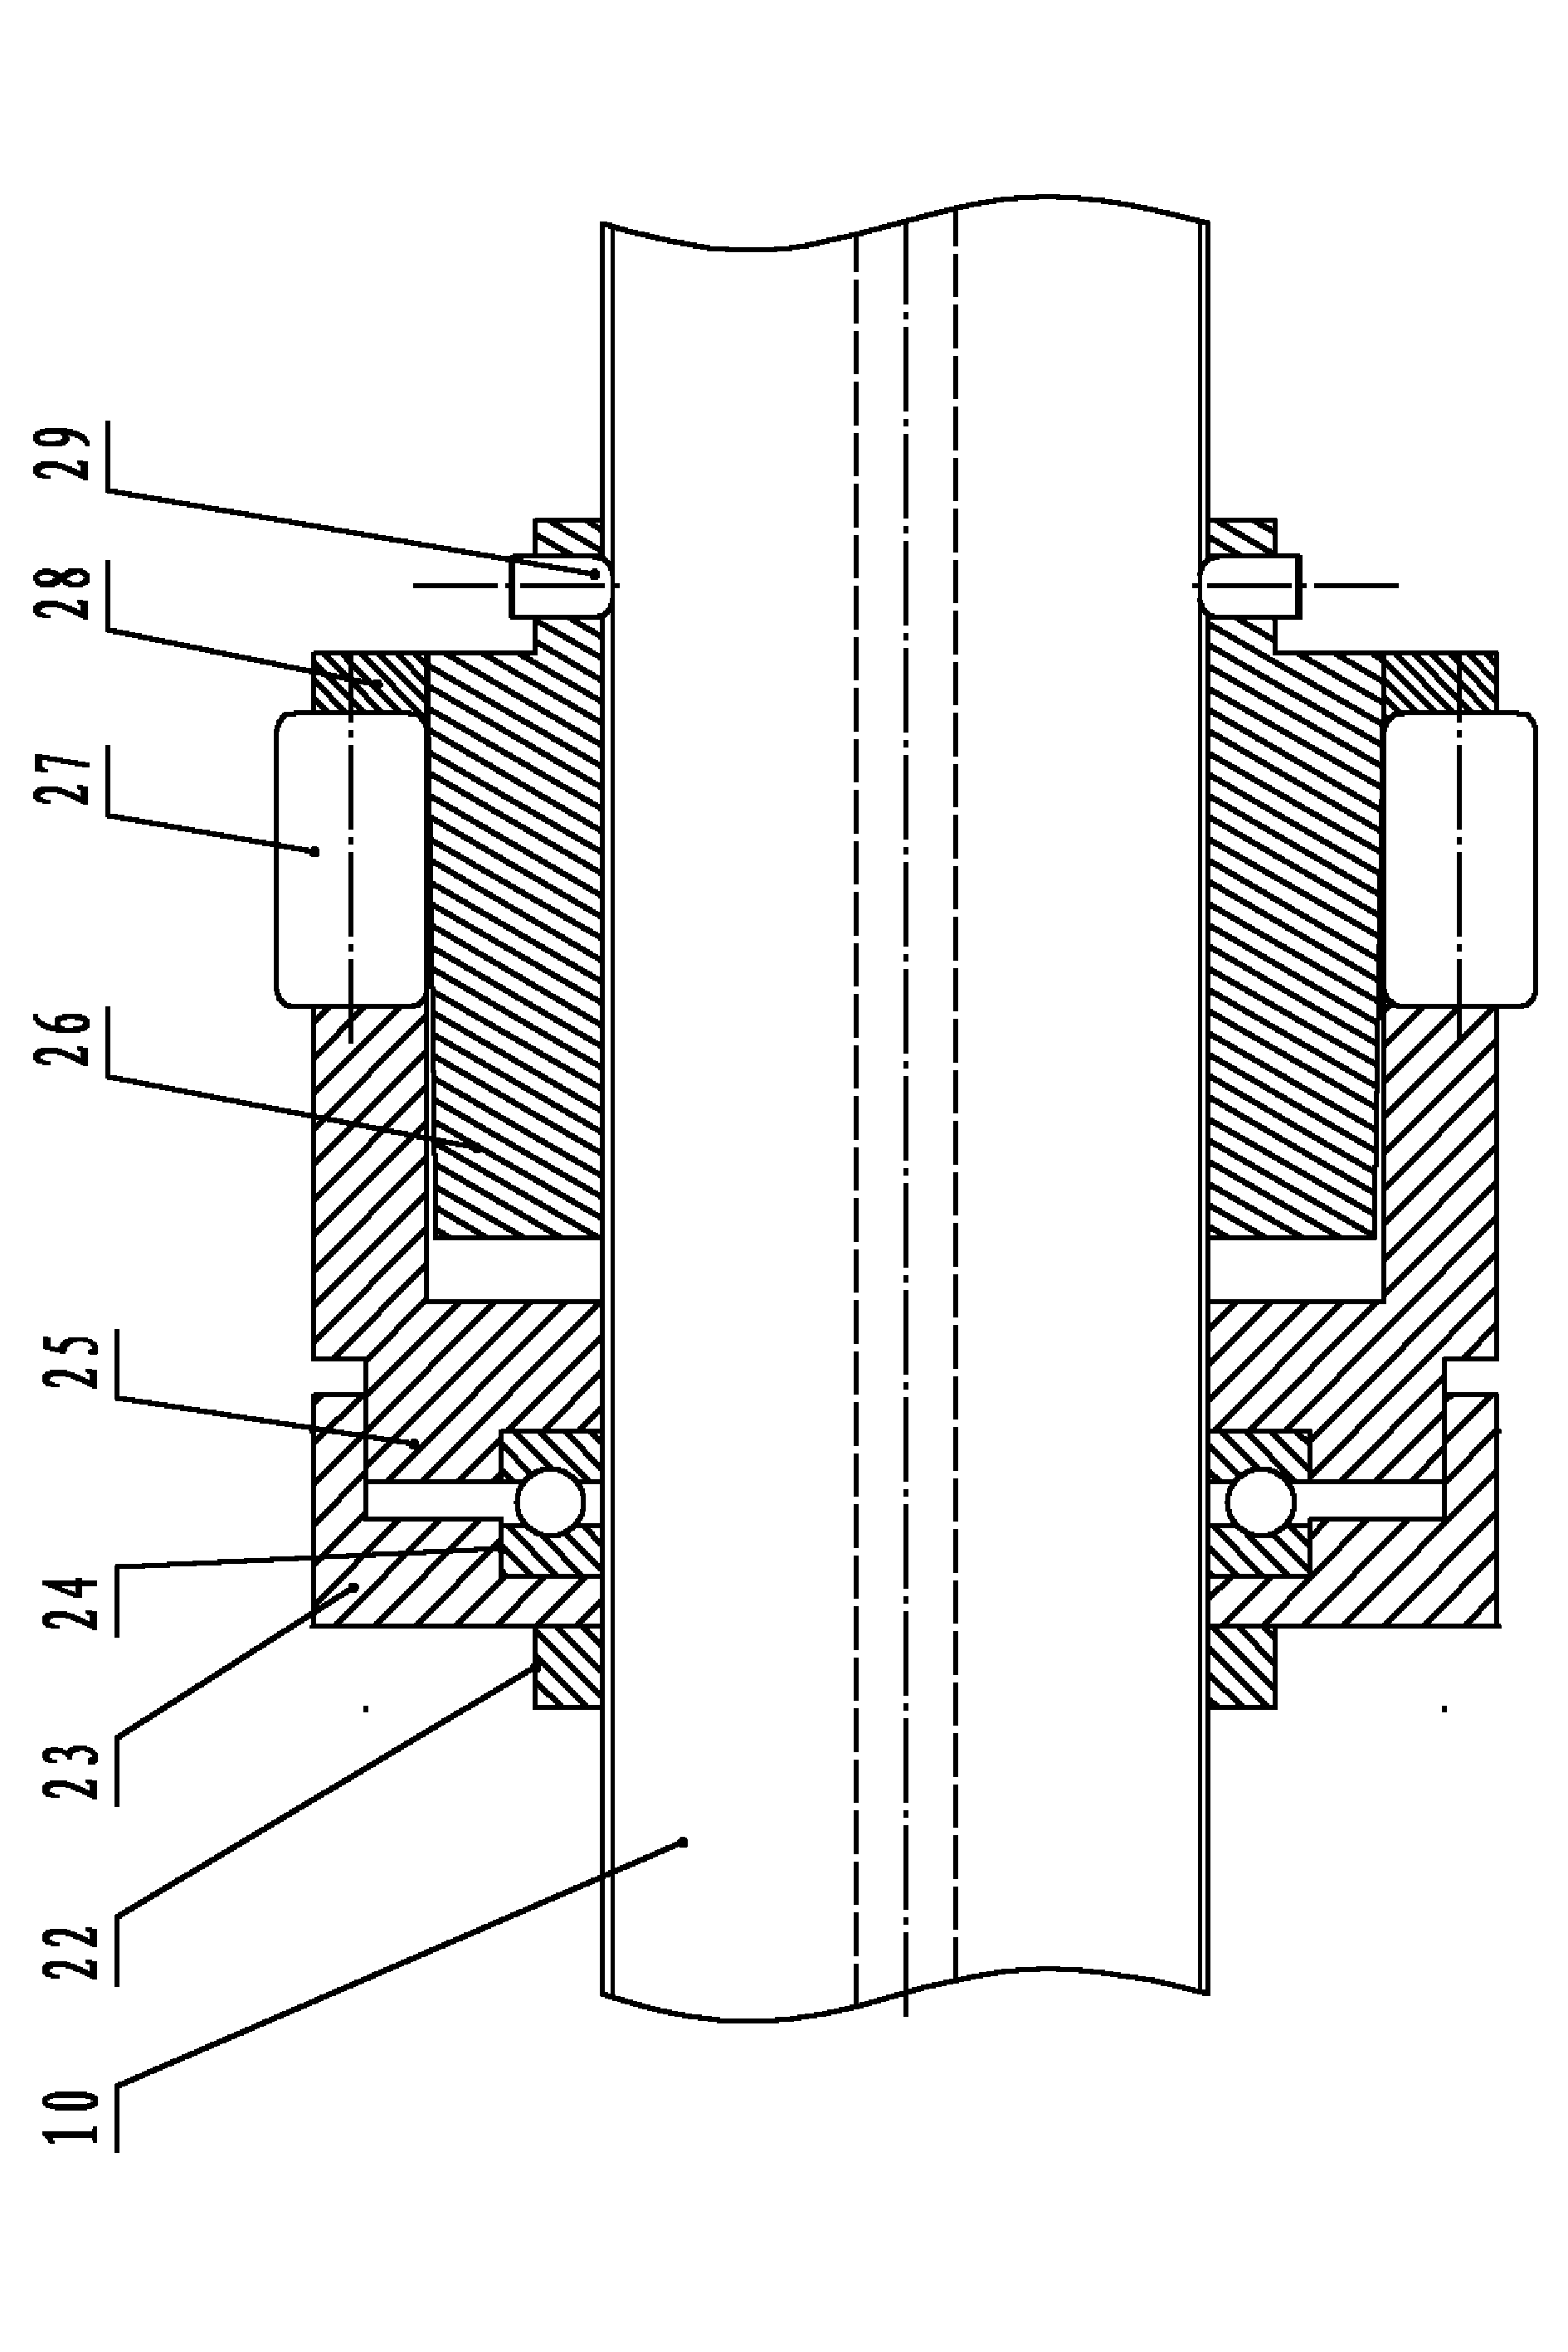 Processing method for inner hole of cylinder